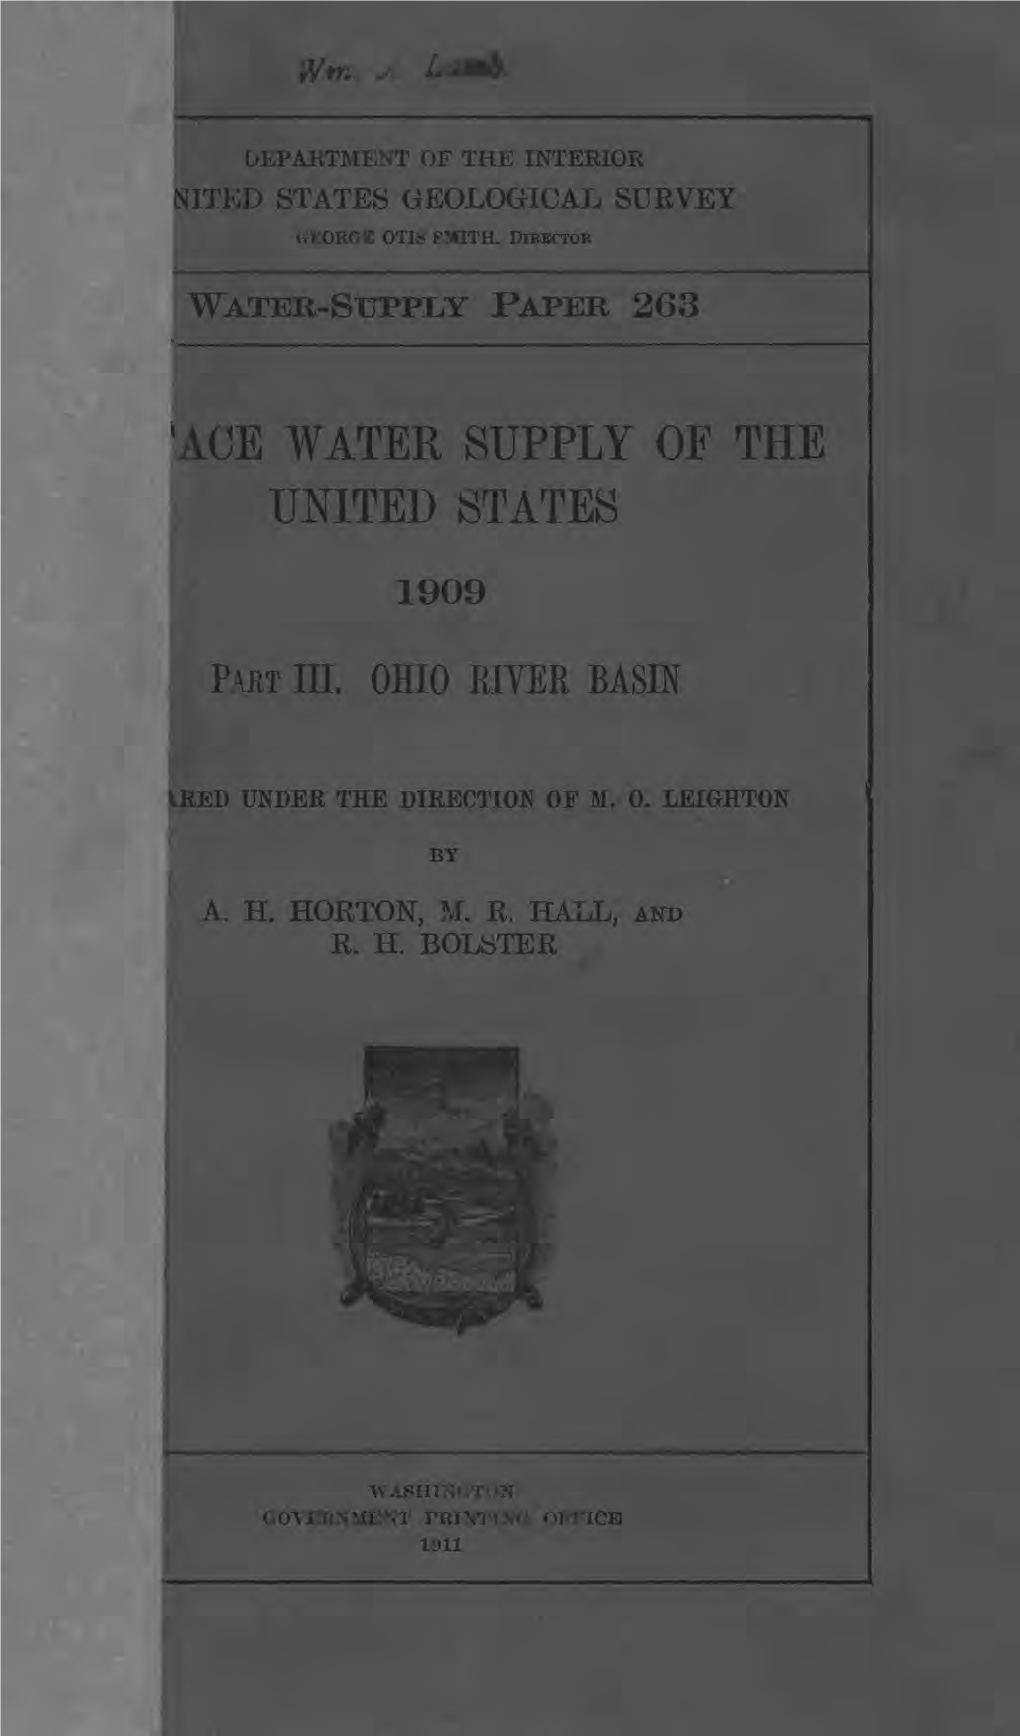 'ACE WATER SUPPLY of the UNITED STATES M 1909